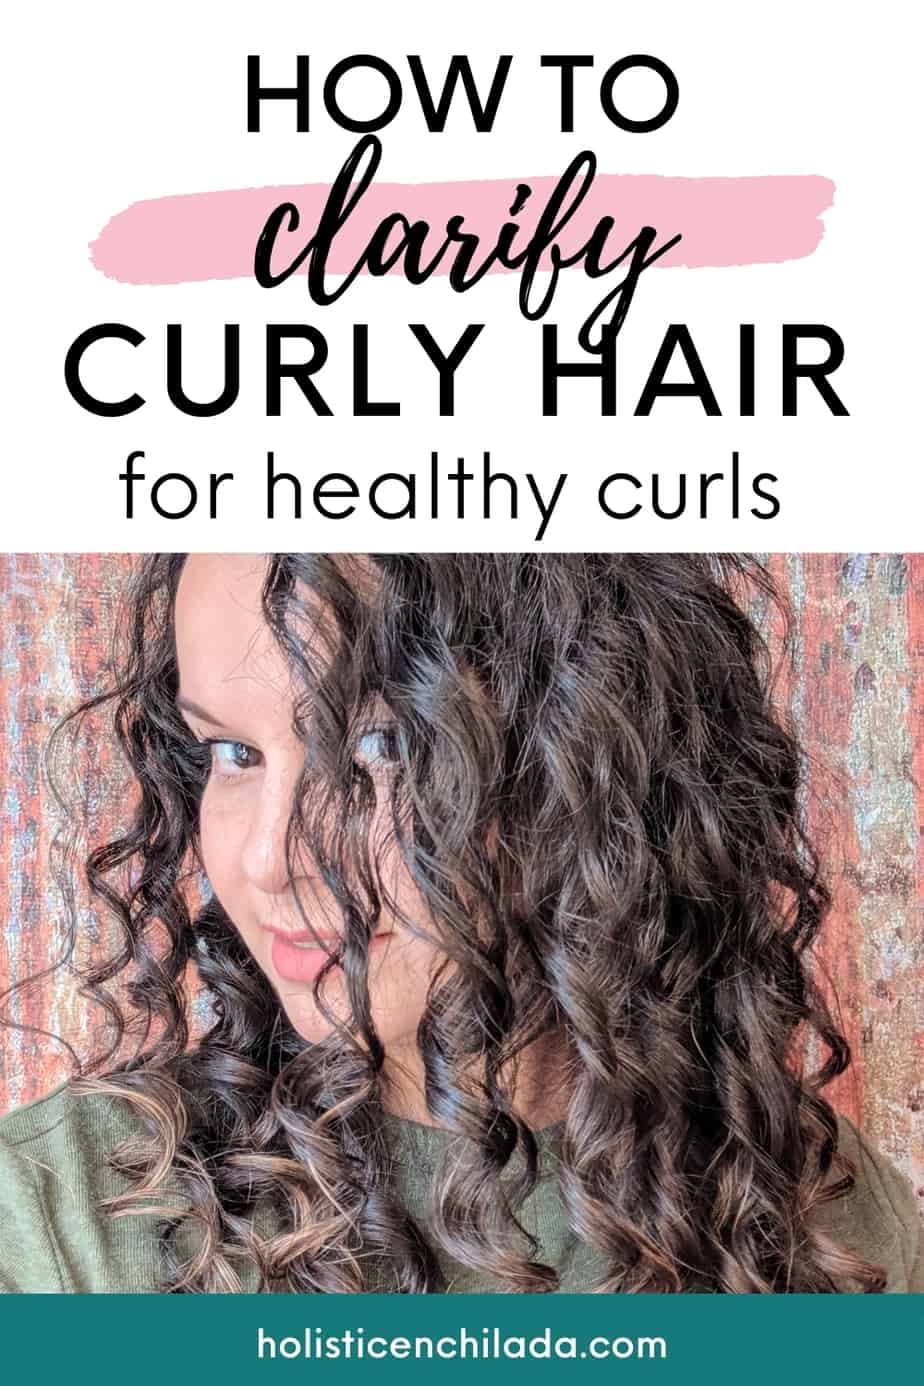 How To Properly Clarify When Following The Curly Girl Method - The ...